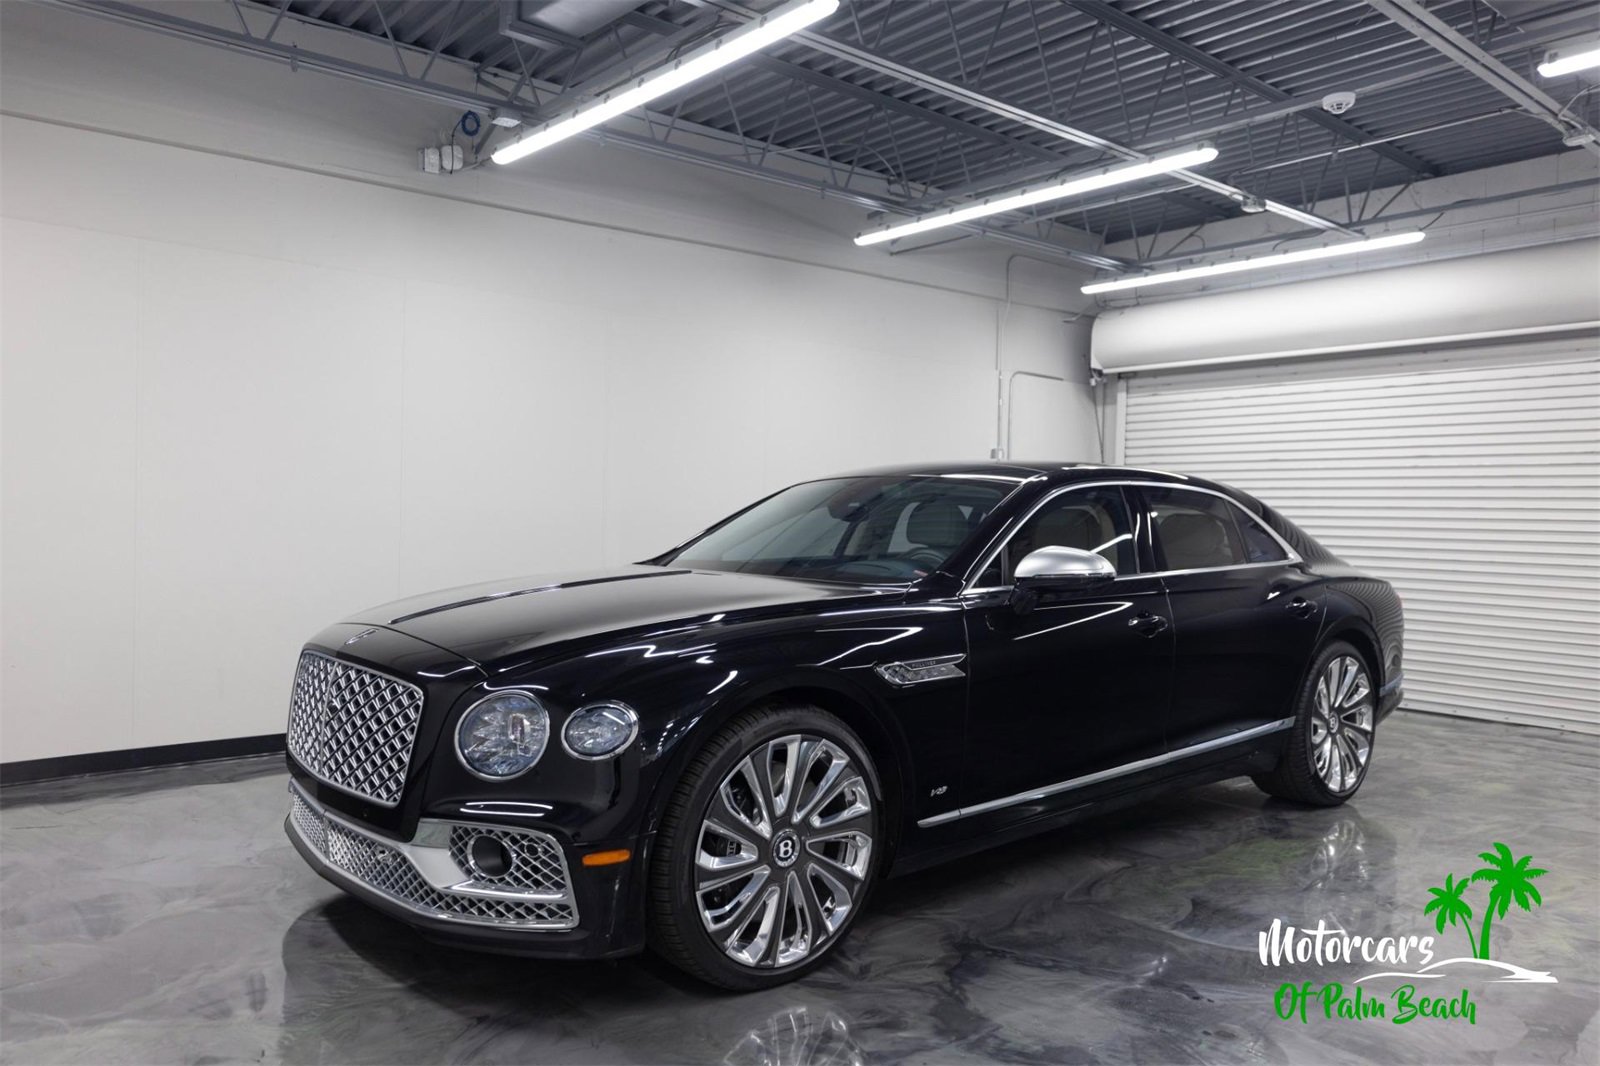 Used Bentley Cars for Sale Right Now - Autotrader